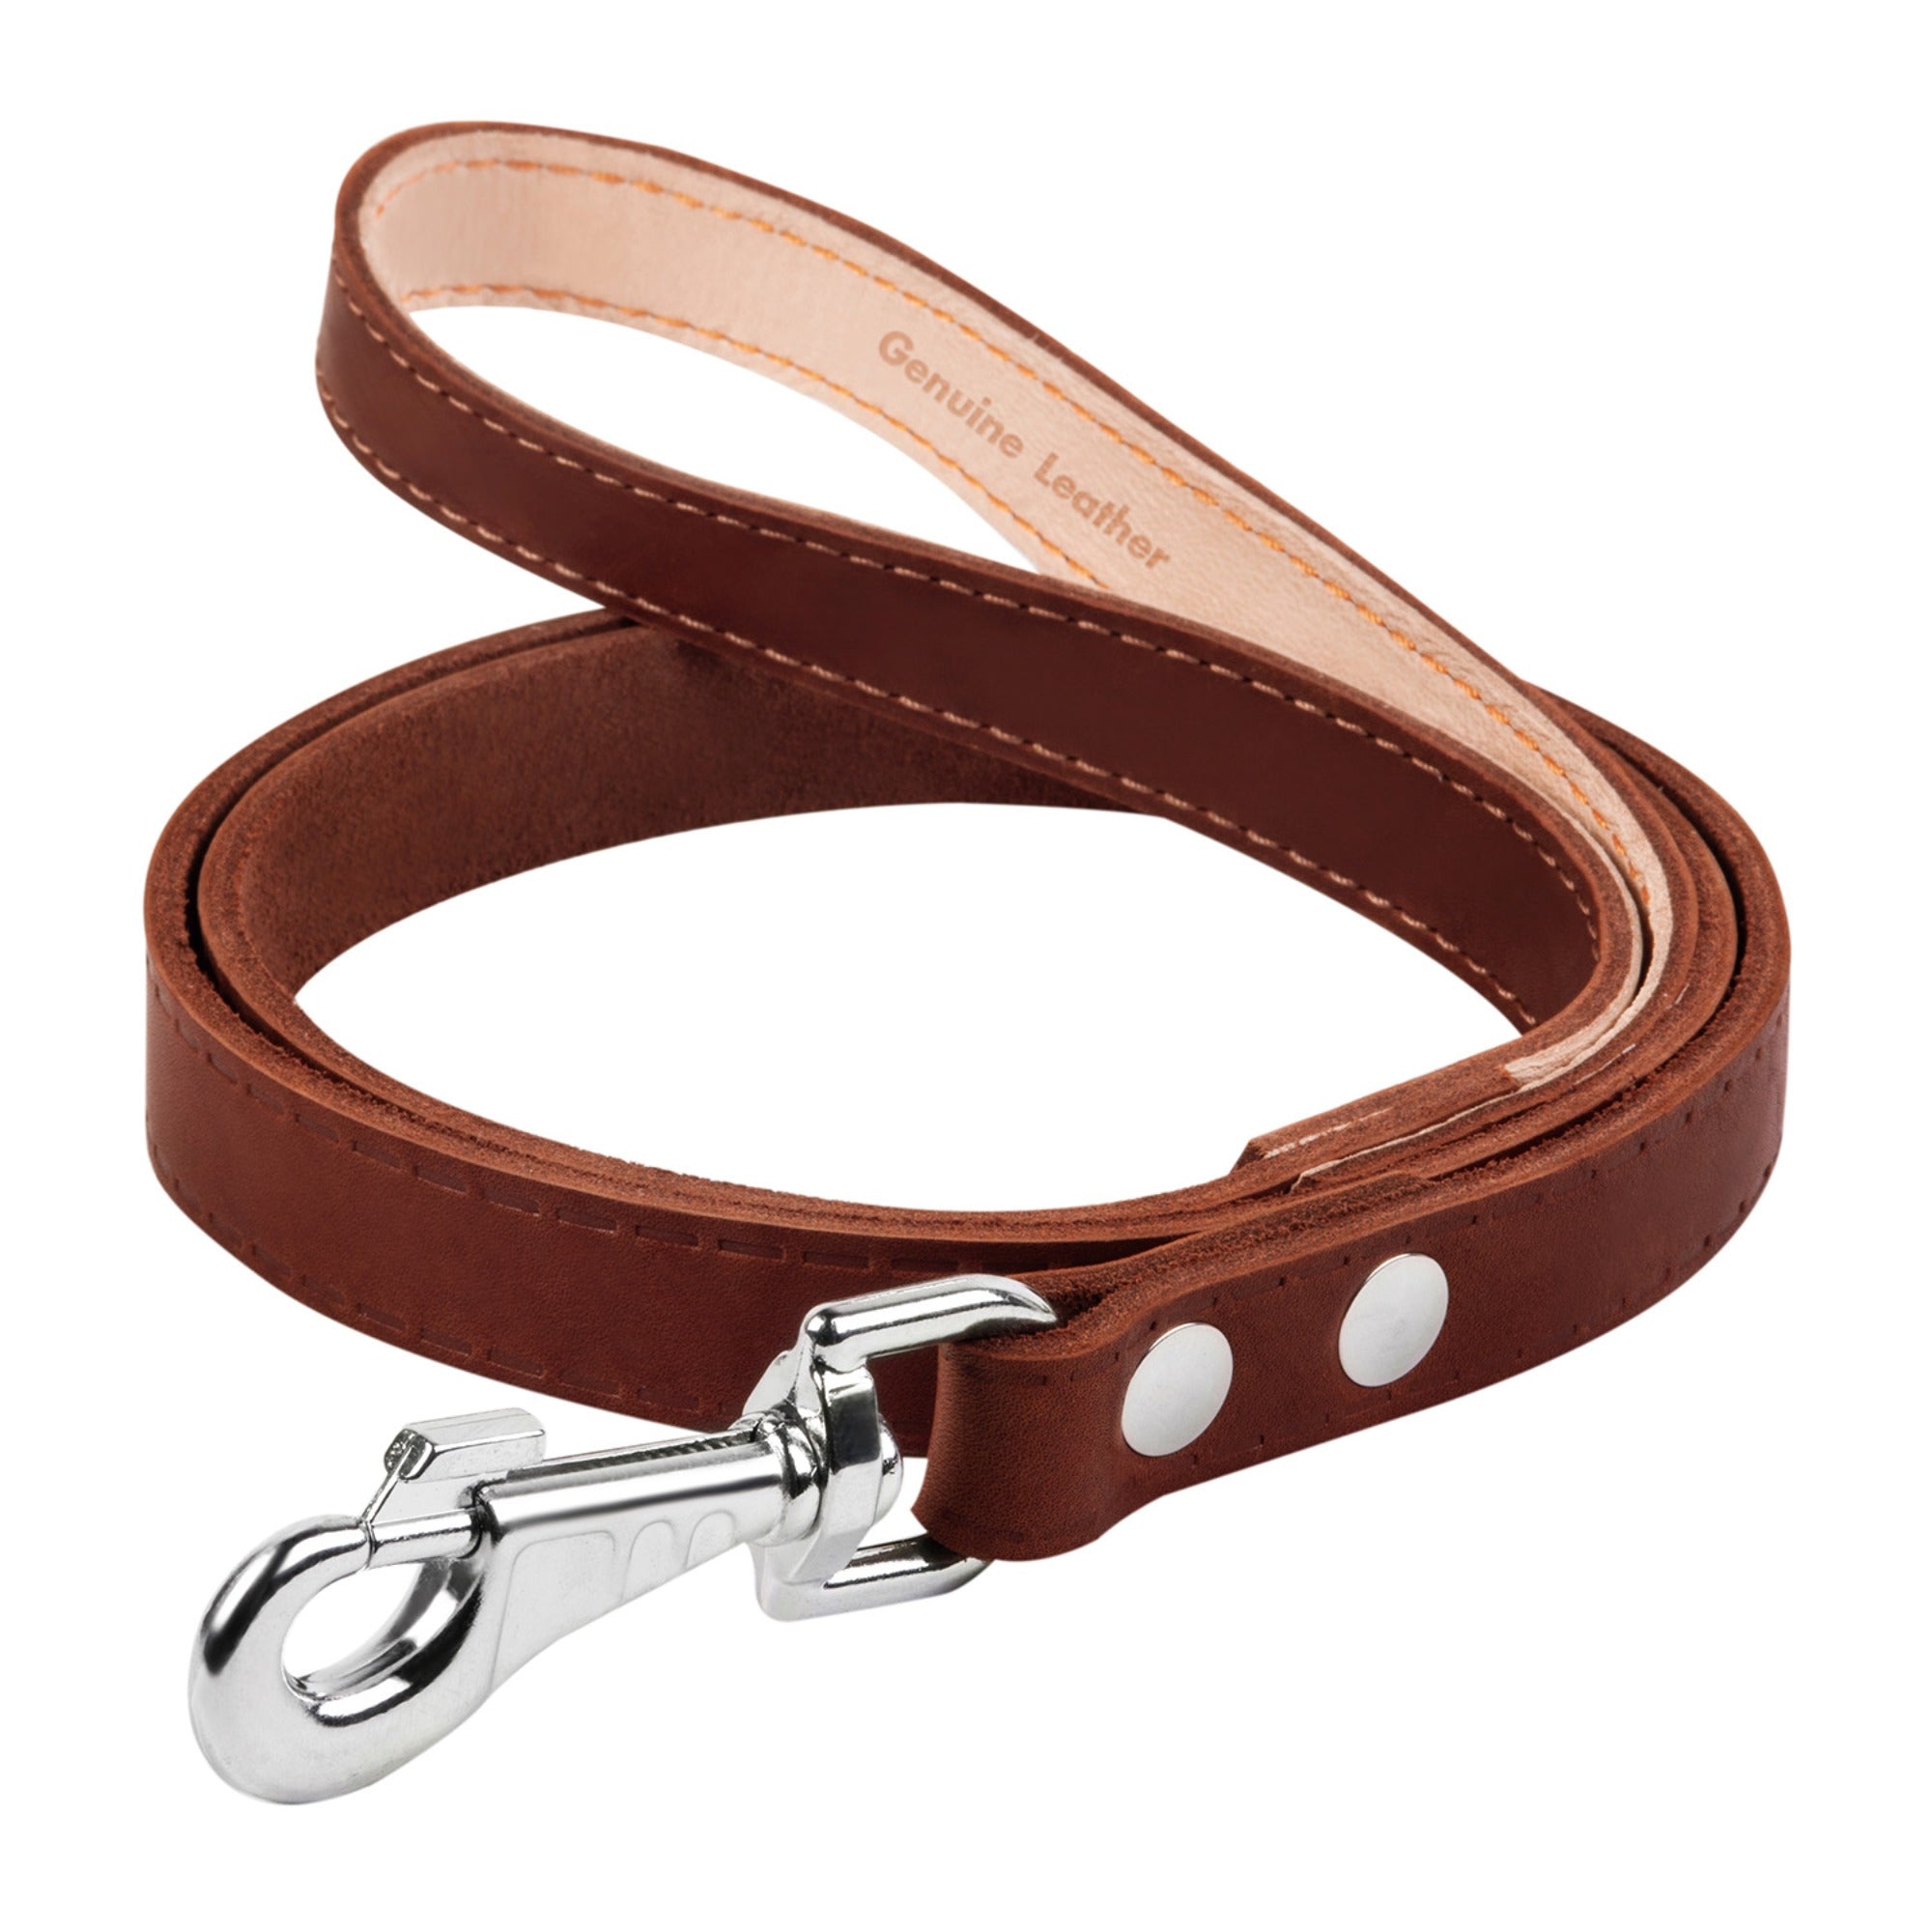 Unsewn Single Ply Leather Leash